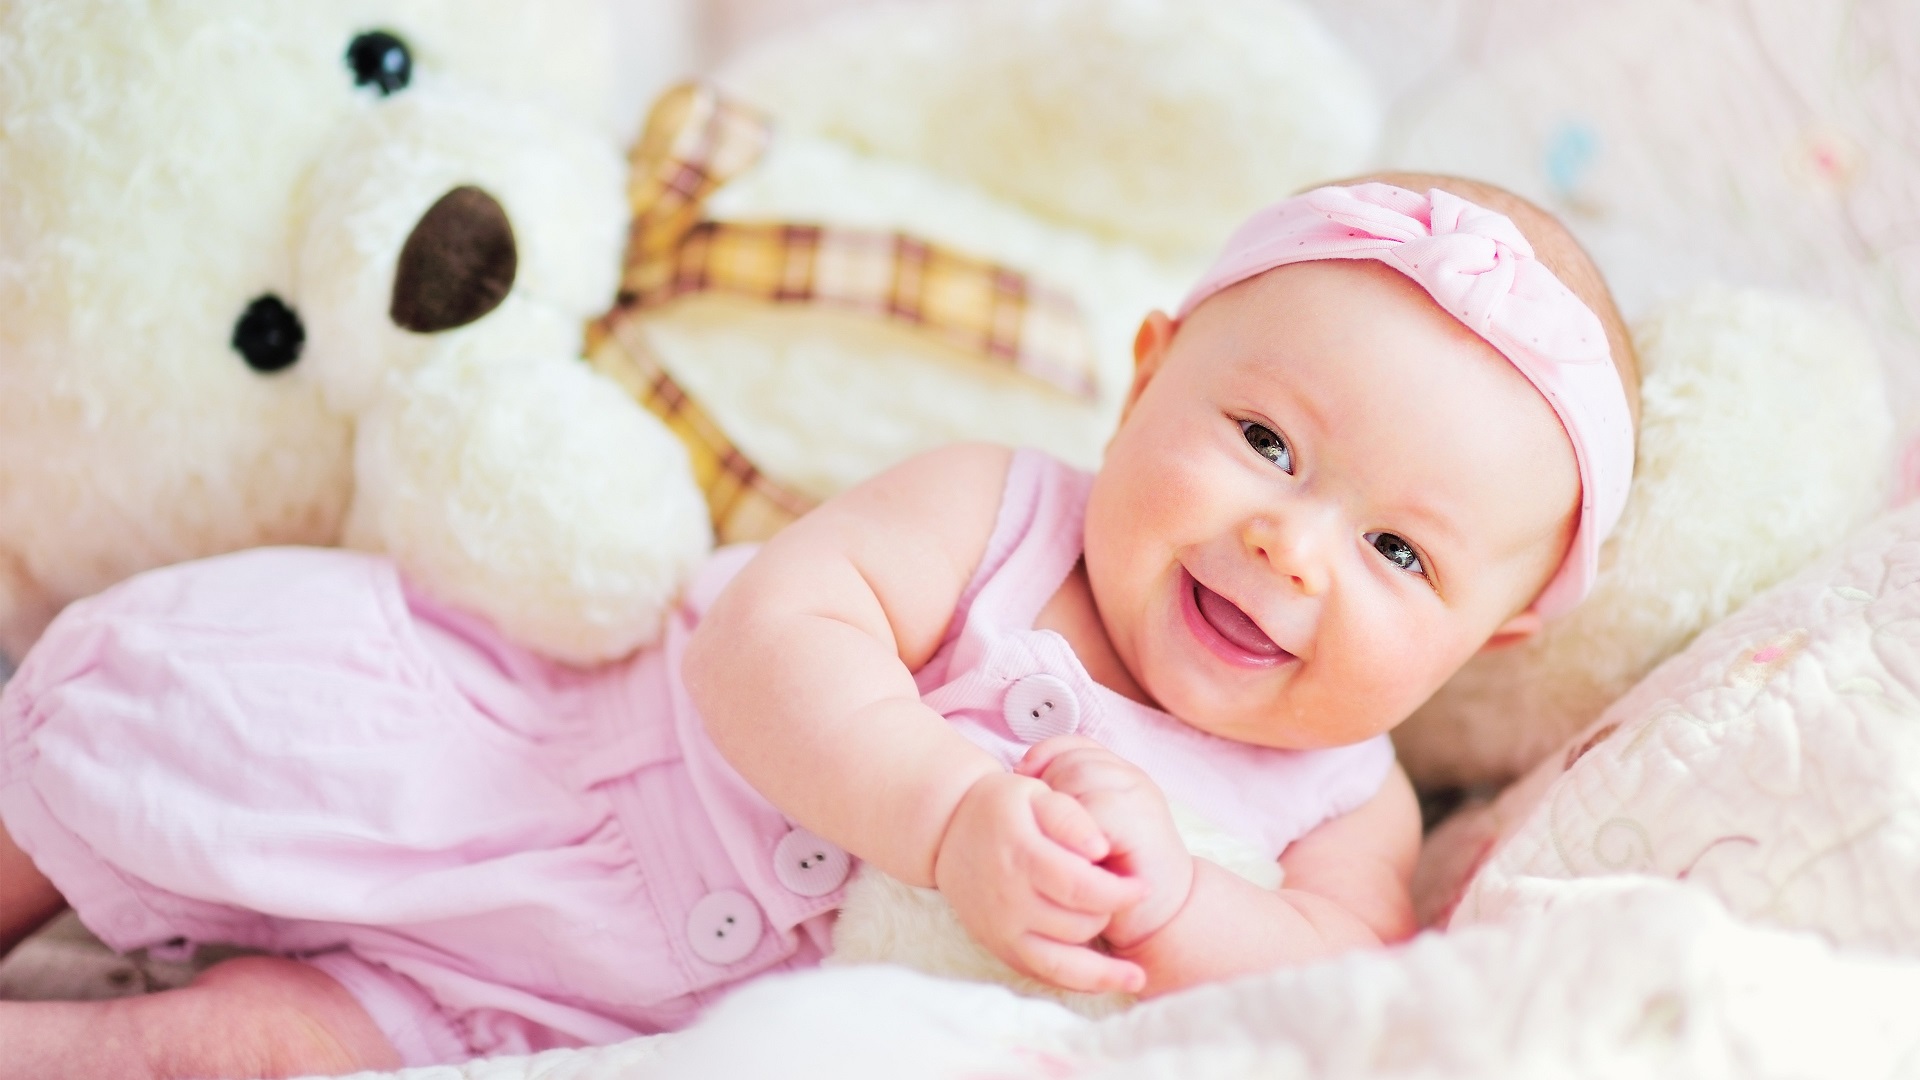 Cute Baby Images, Photos, Pictures & HD Wallpapers